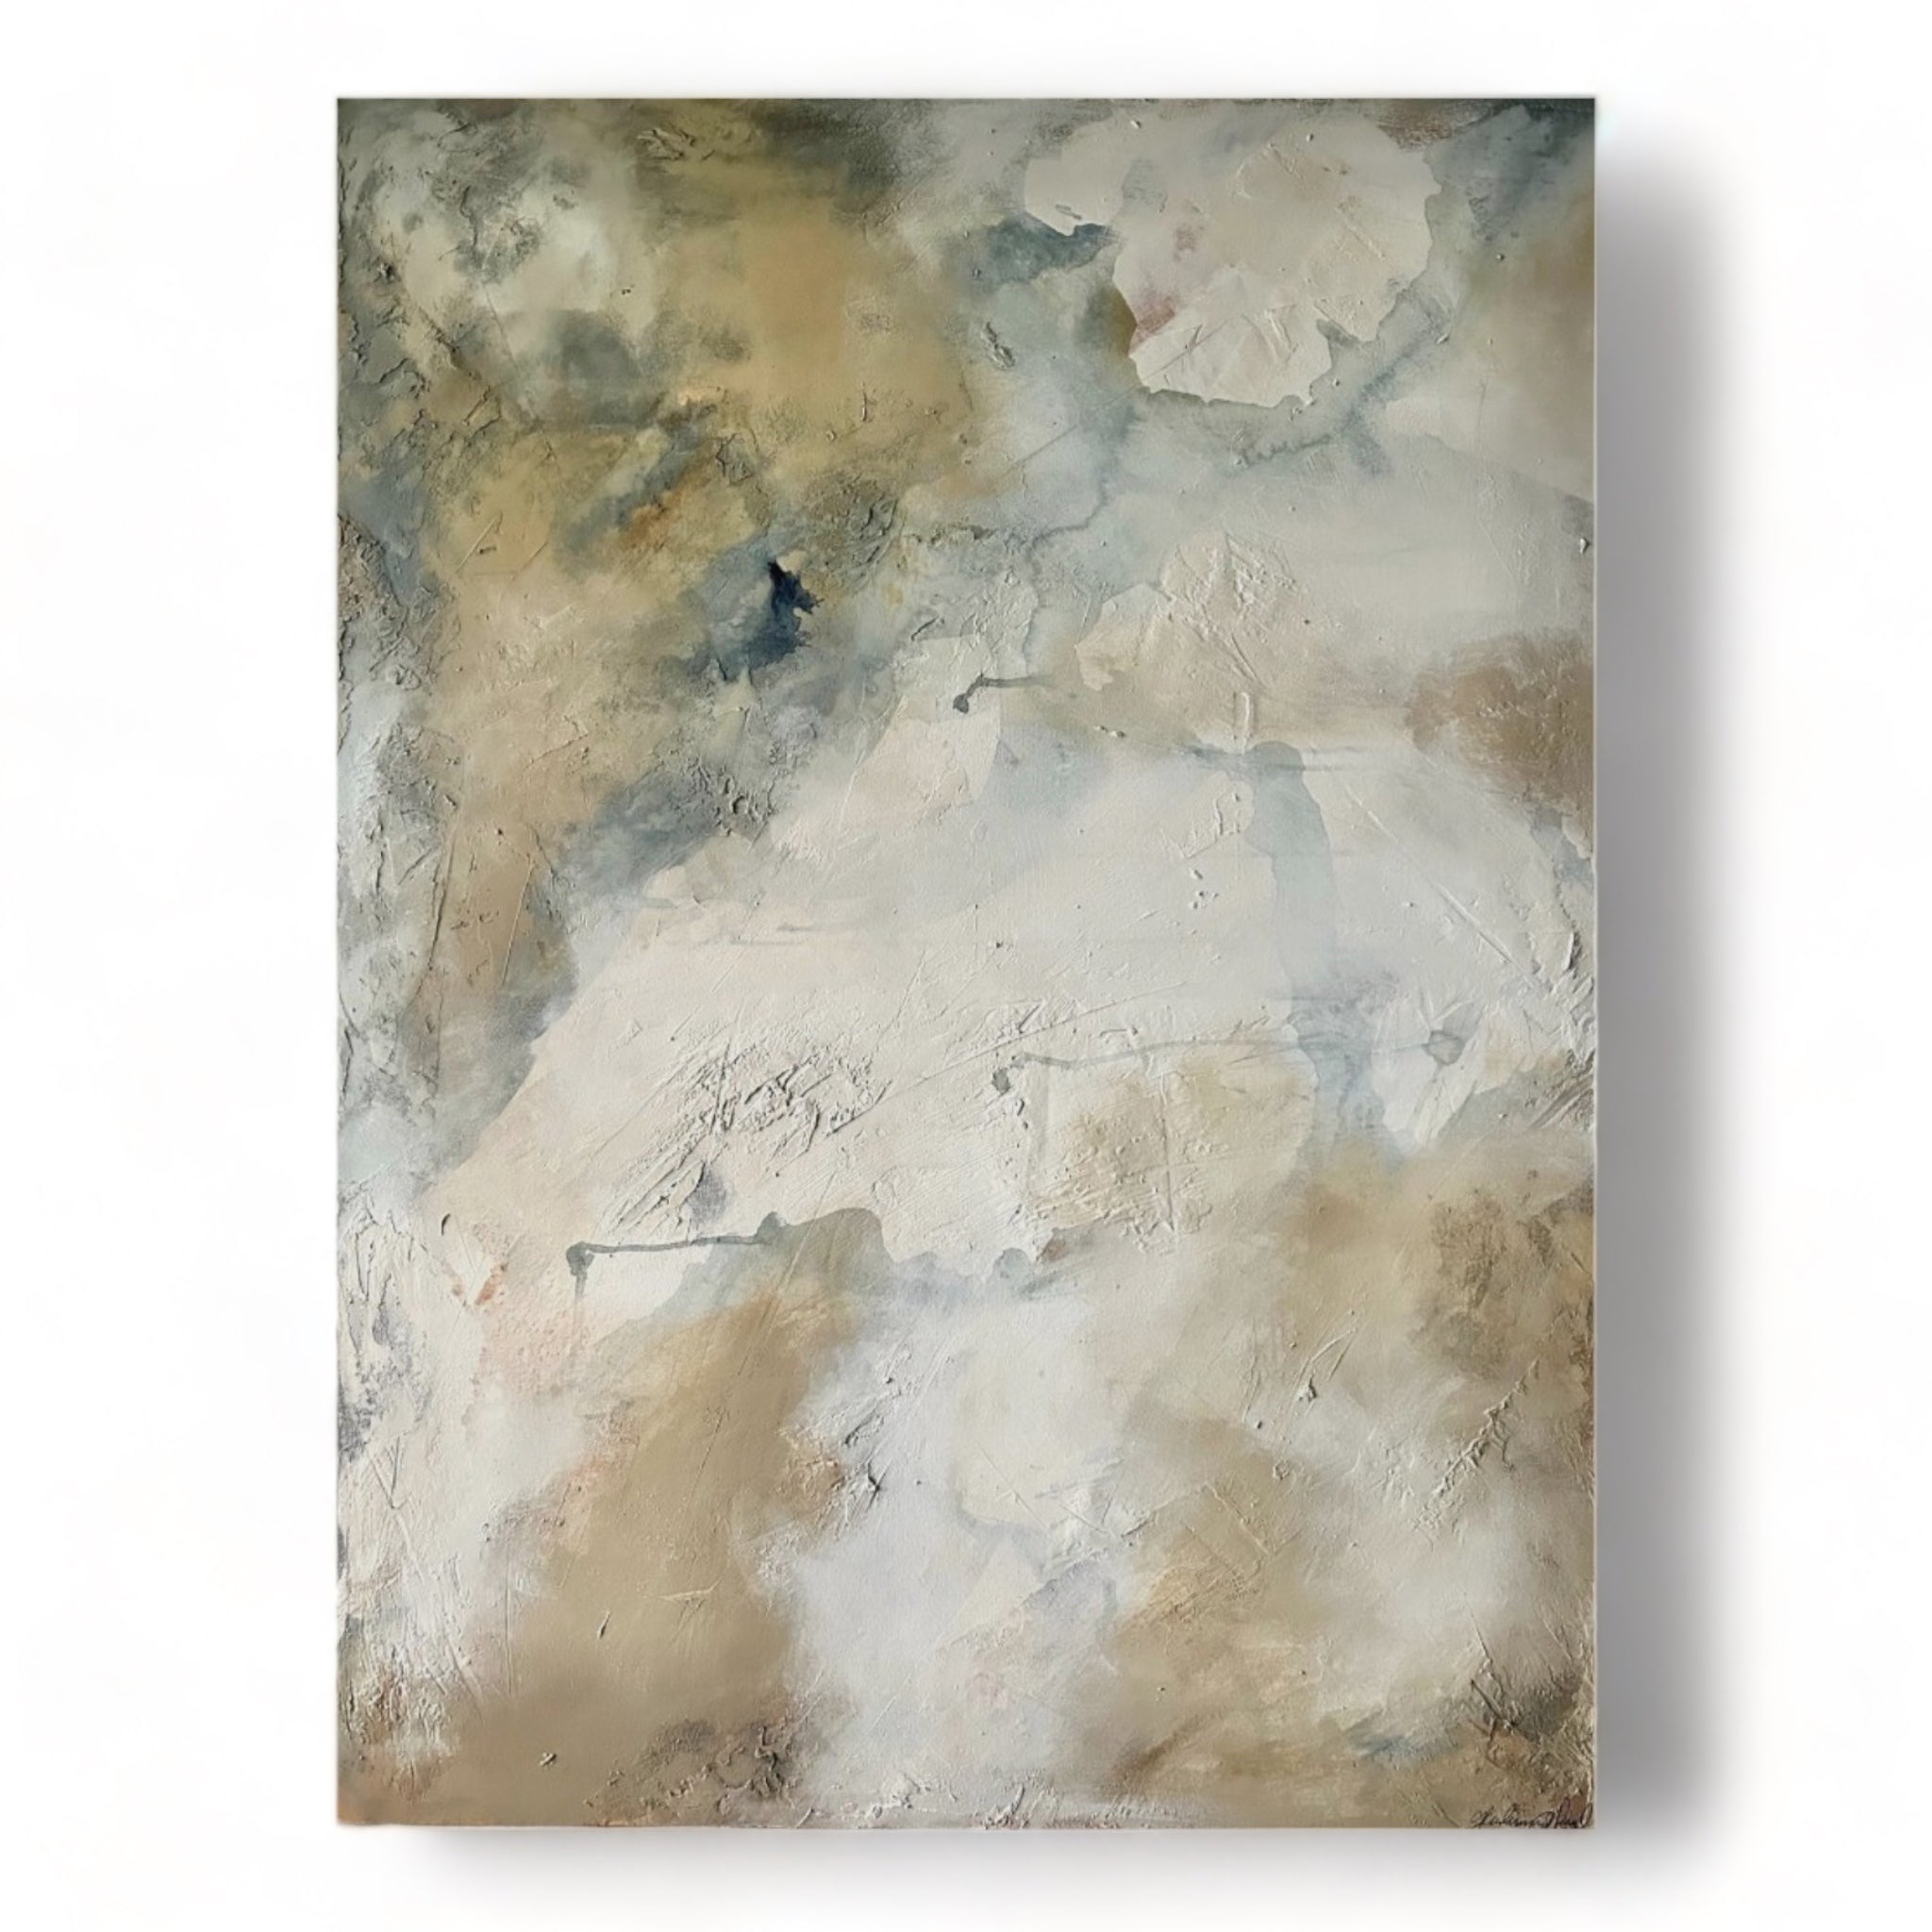 Beautiful abstract artwork painting by Birmingham artist Glendinning Paul .  Morning mist incorporates neutral tones and a touch of blue.  